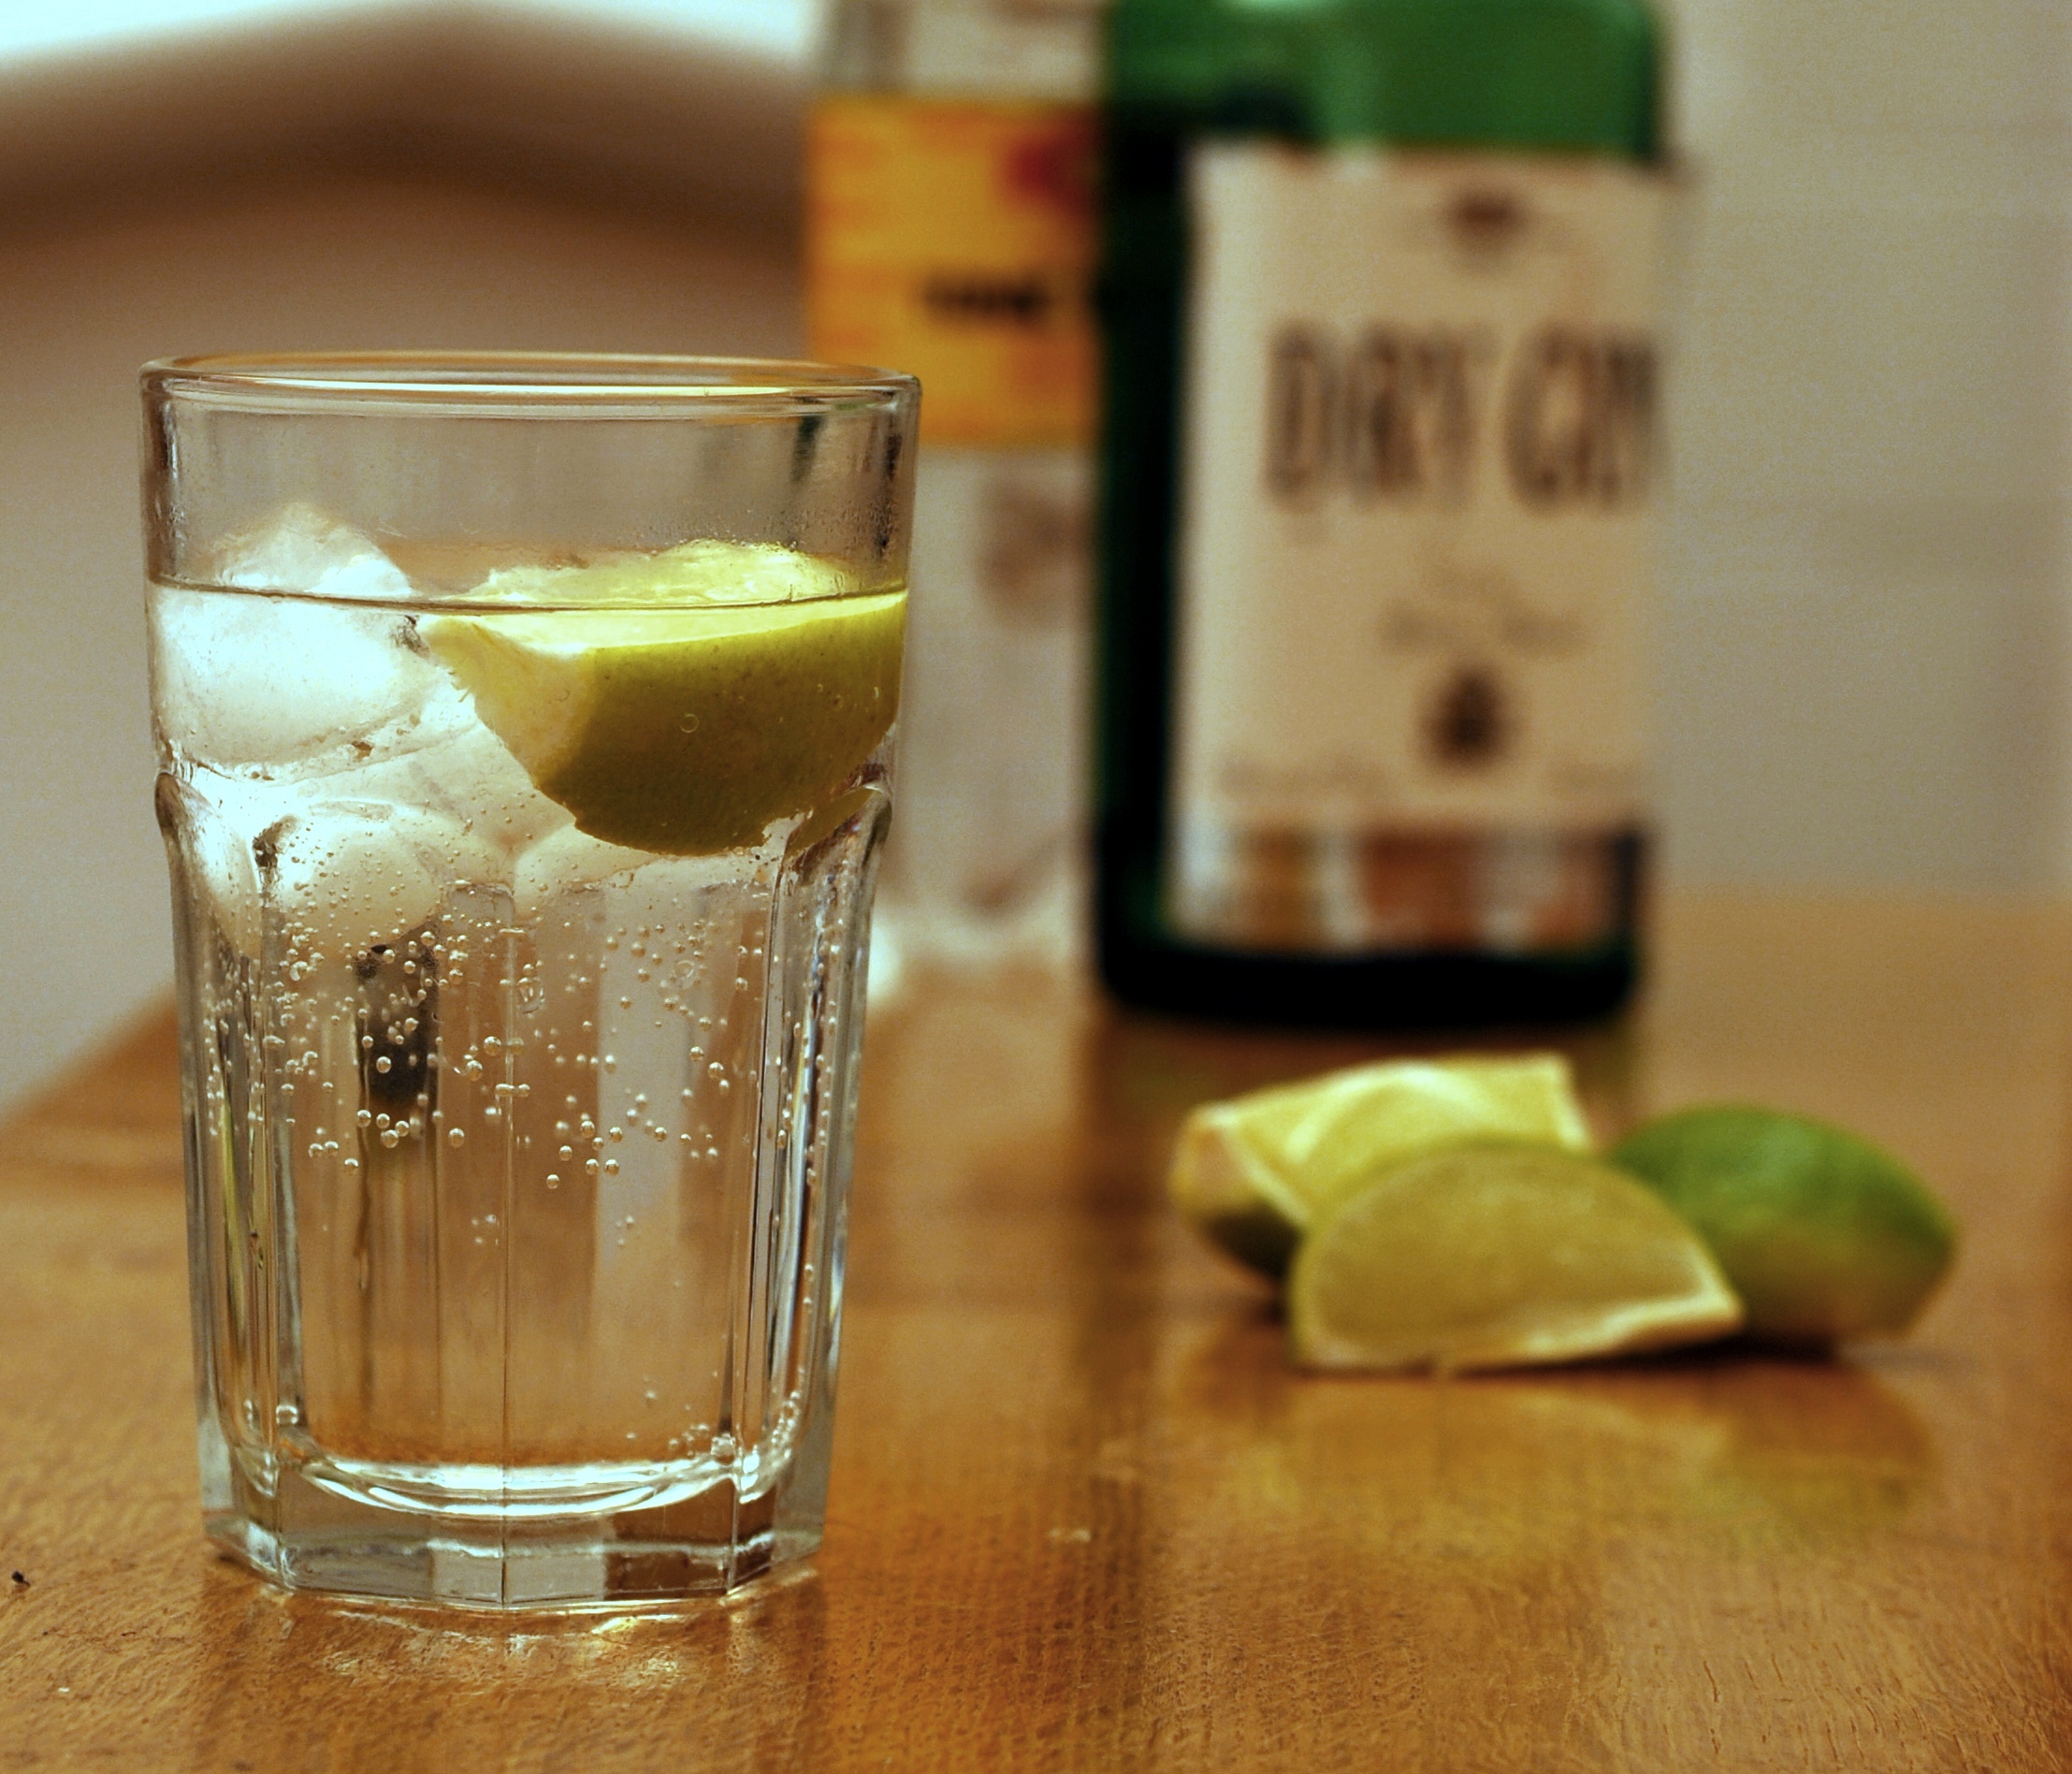 Photograph of a gin and tonic cocktail in a clear drinking glass with a wedge of lime floating in it. The liquid in the glass is clear with some bubbles. More wedges of lime and a bottle of gin and a bottle of tonic can be seen in the background.